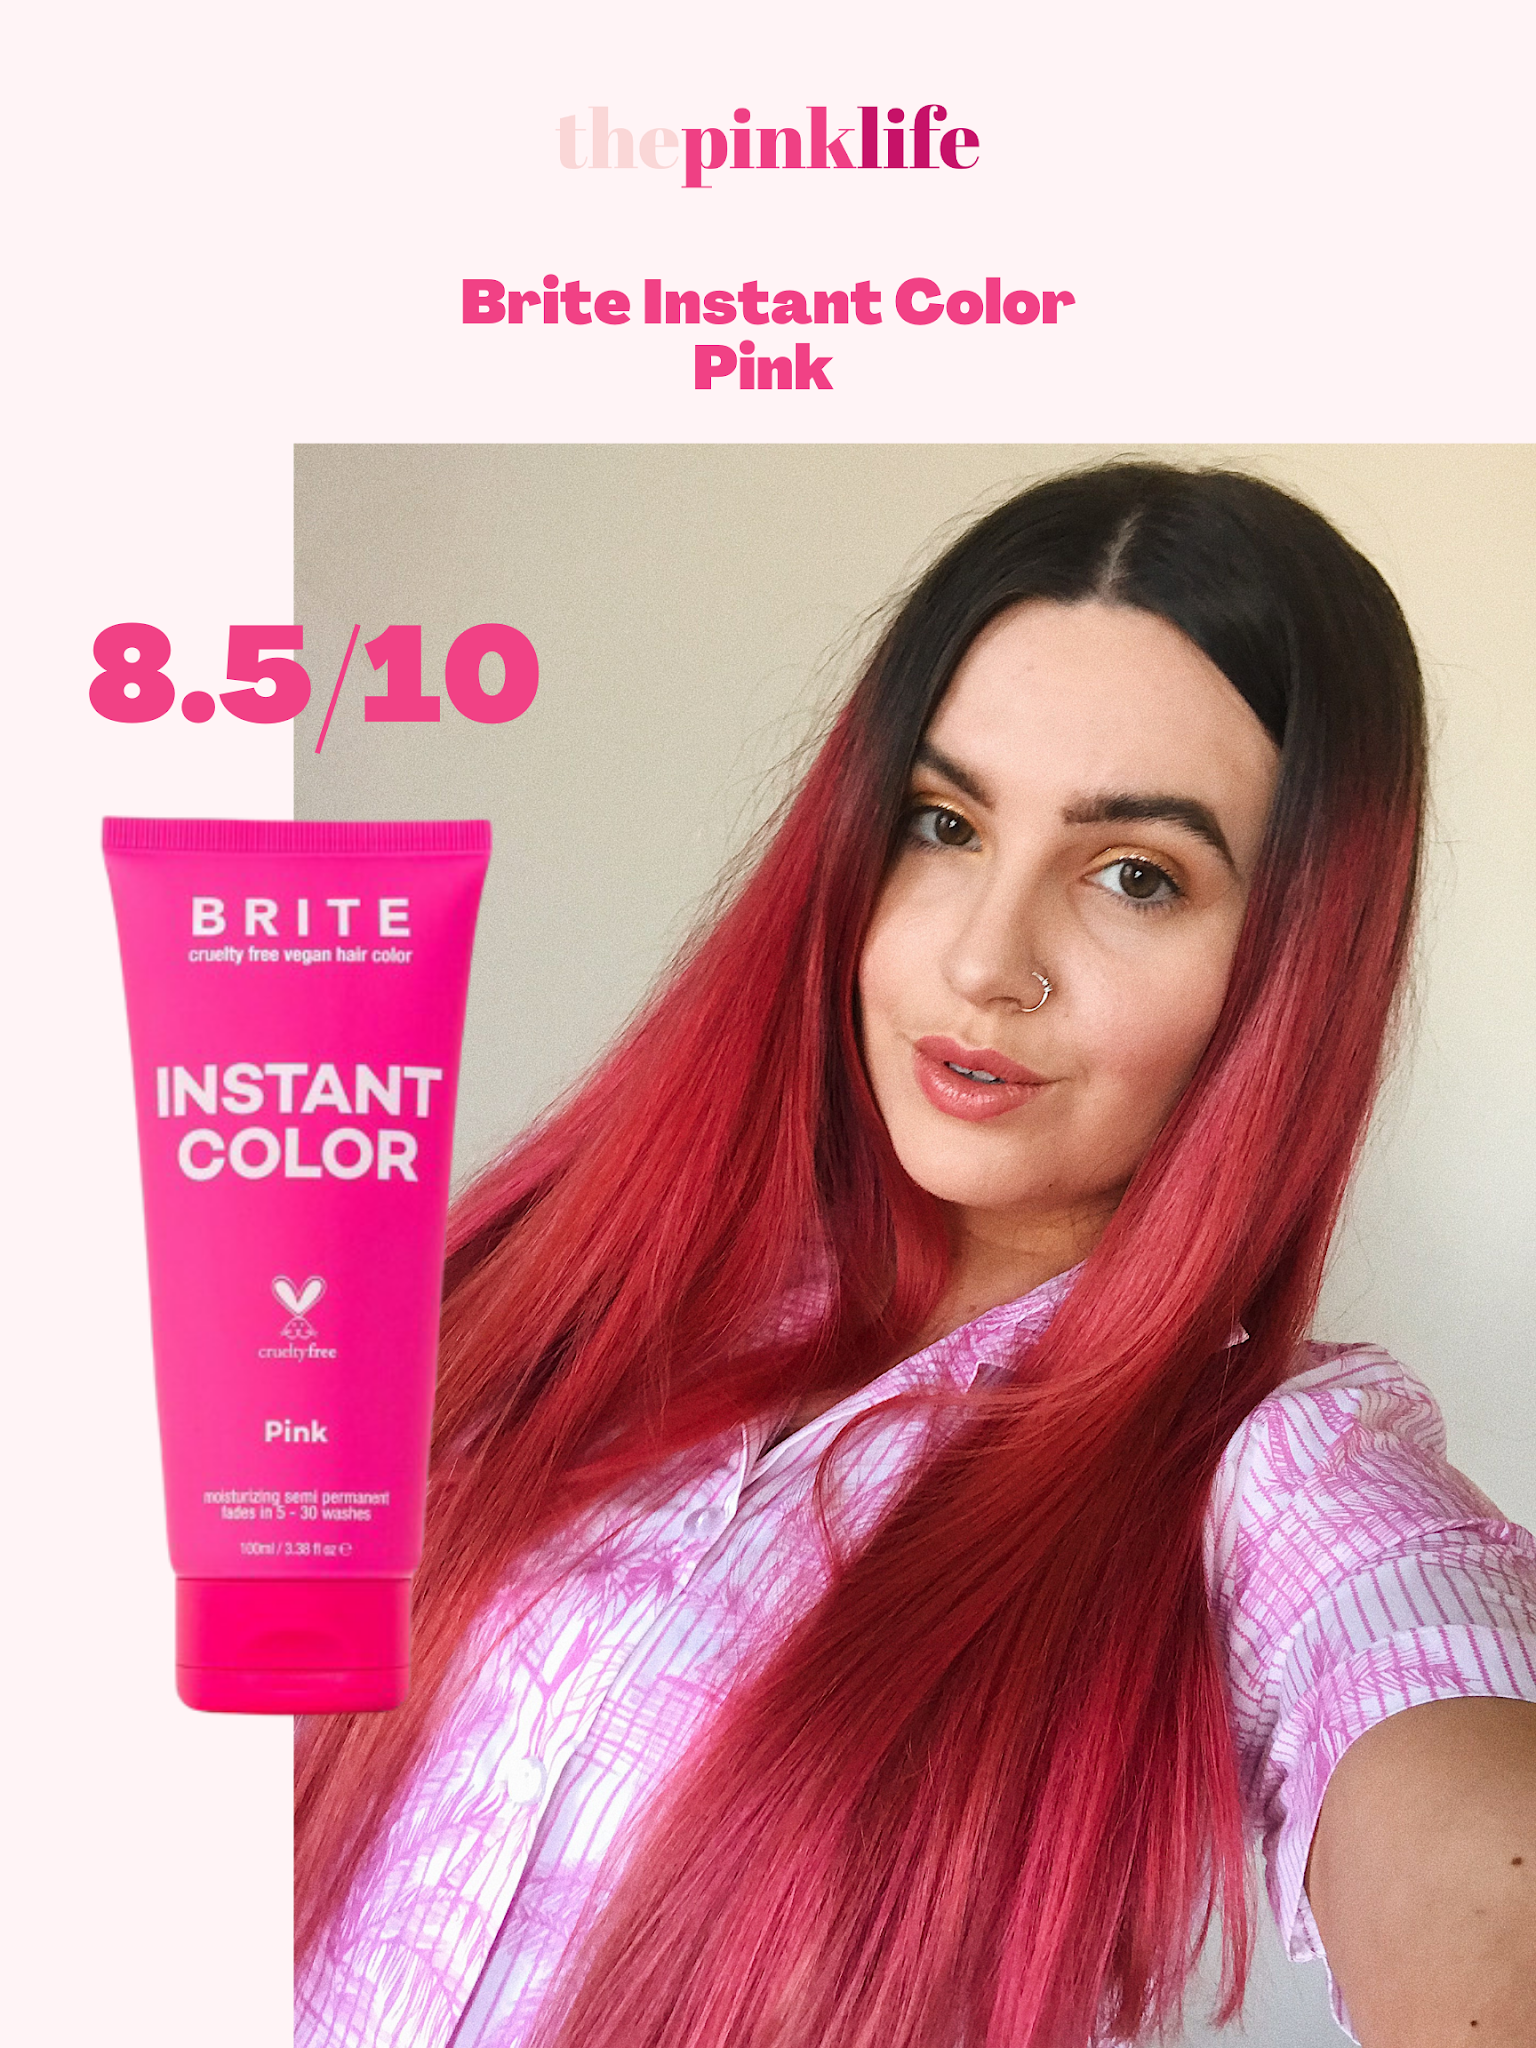 Pink dye is here to stay, what should I do to switch it up? : r/HairDye